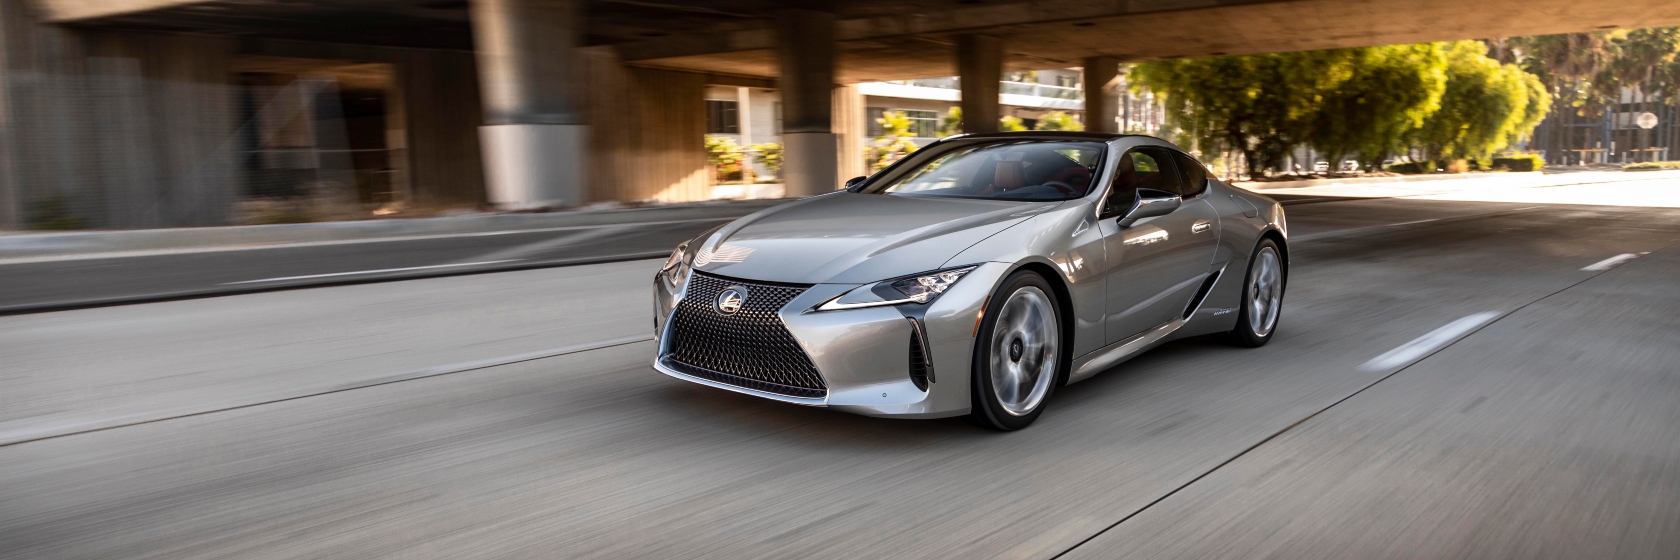 discover-the-latest-lexus-models